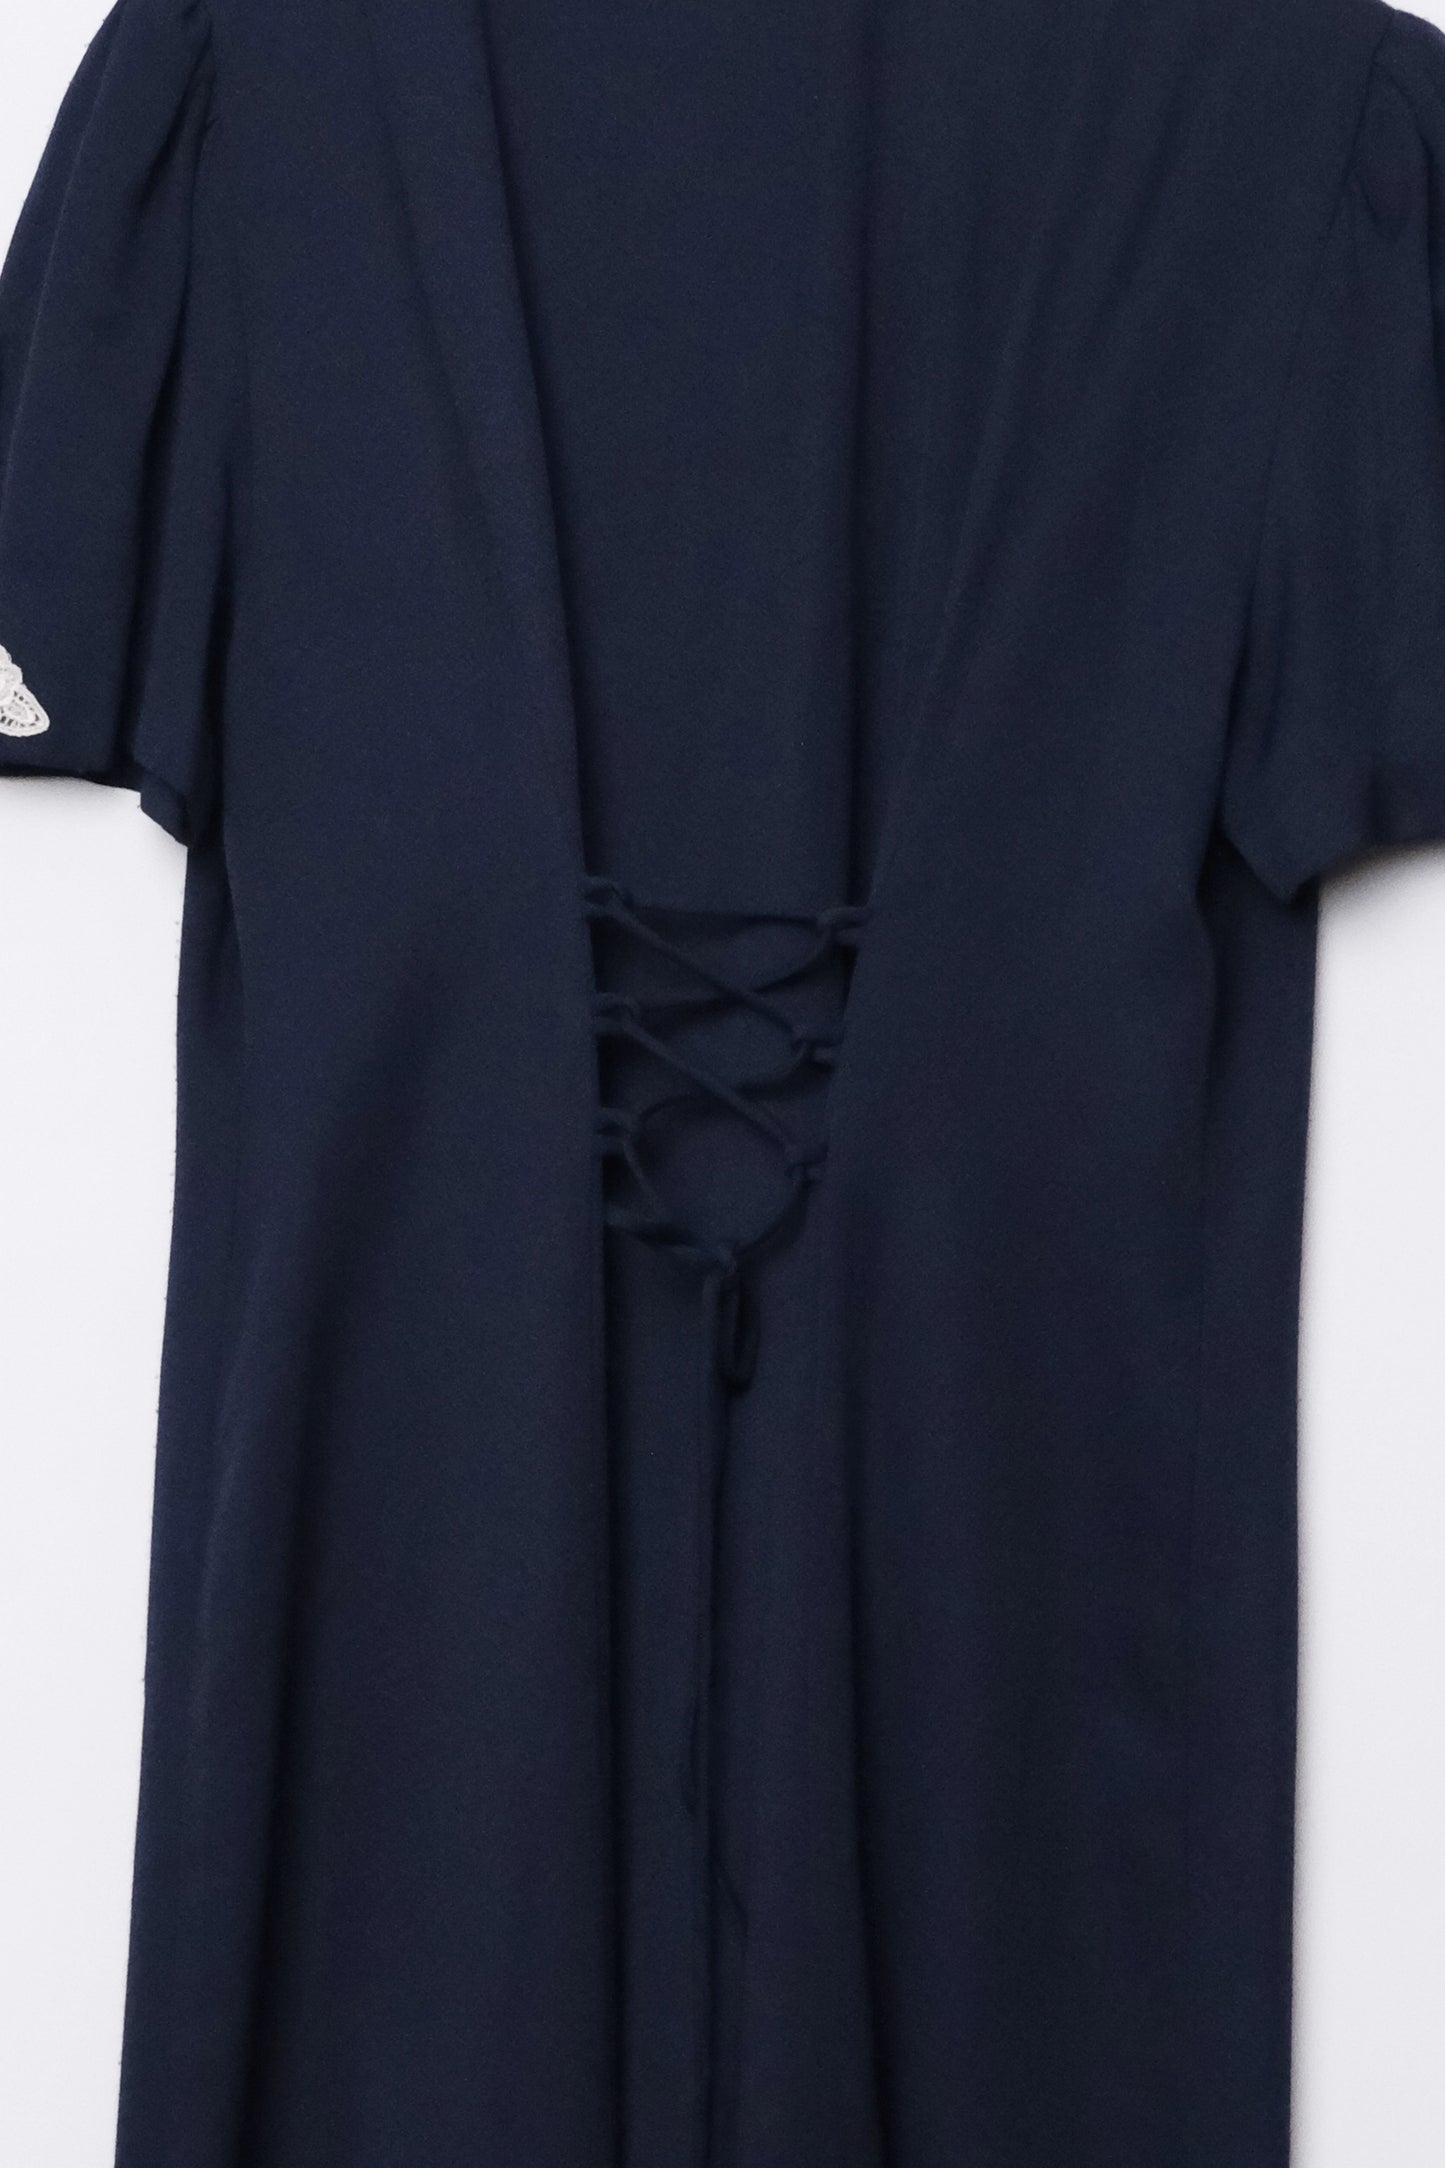 Pearl Button Dress Navy Blue with Lace Sailor Collar 90's US 10